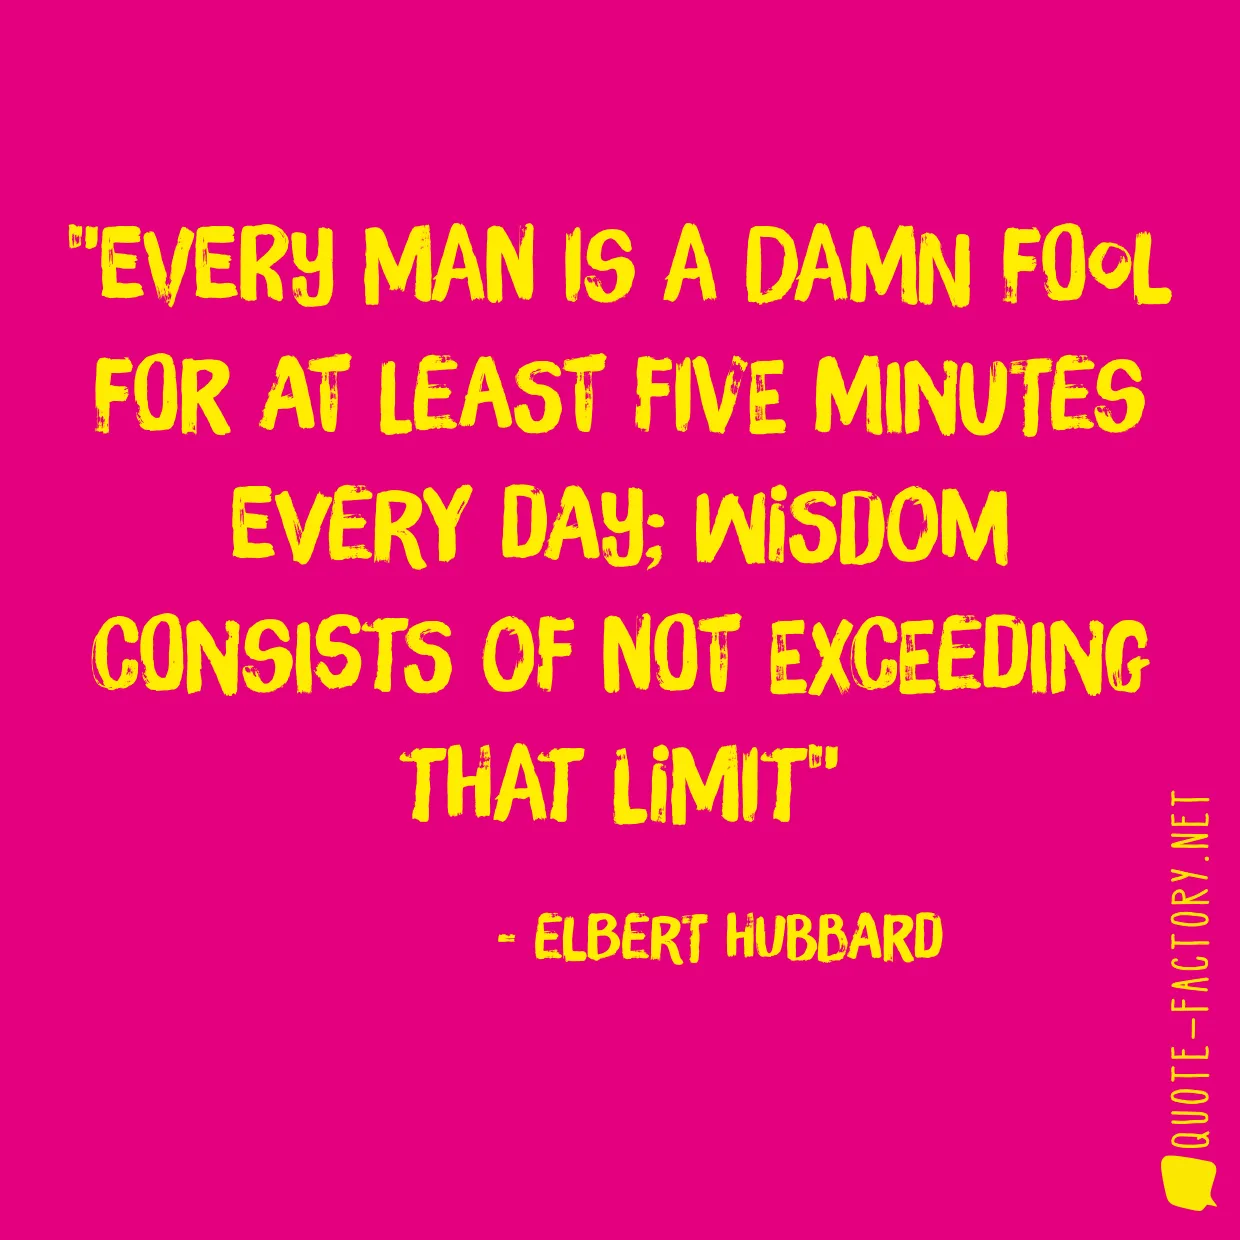 Every man is a damn fool for at least five minutes every day; wisdom consists of not exceeding that limit